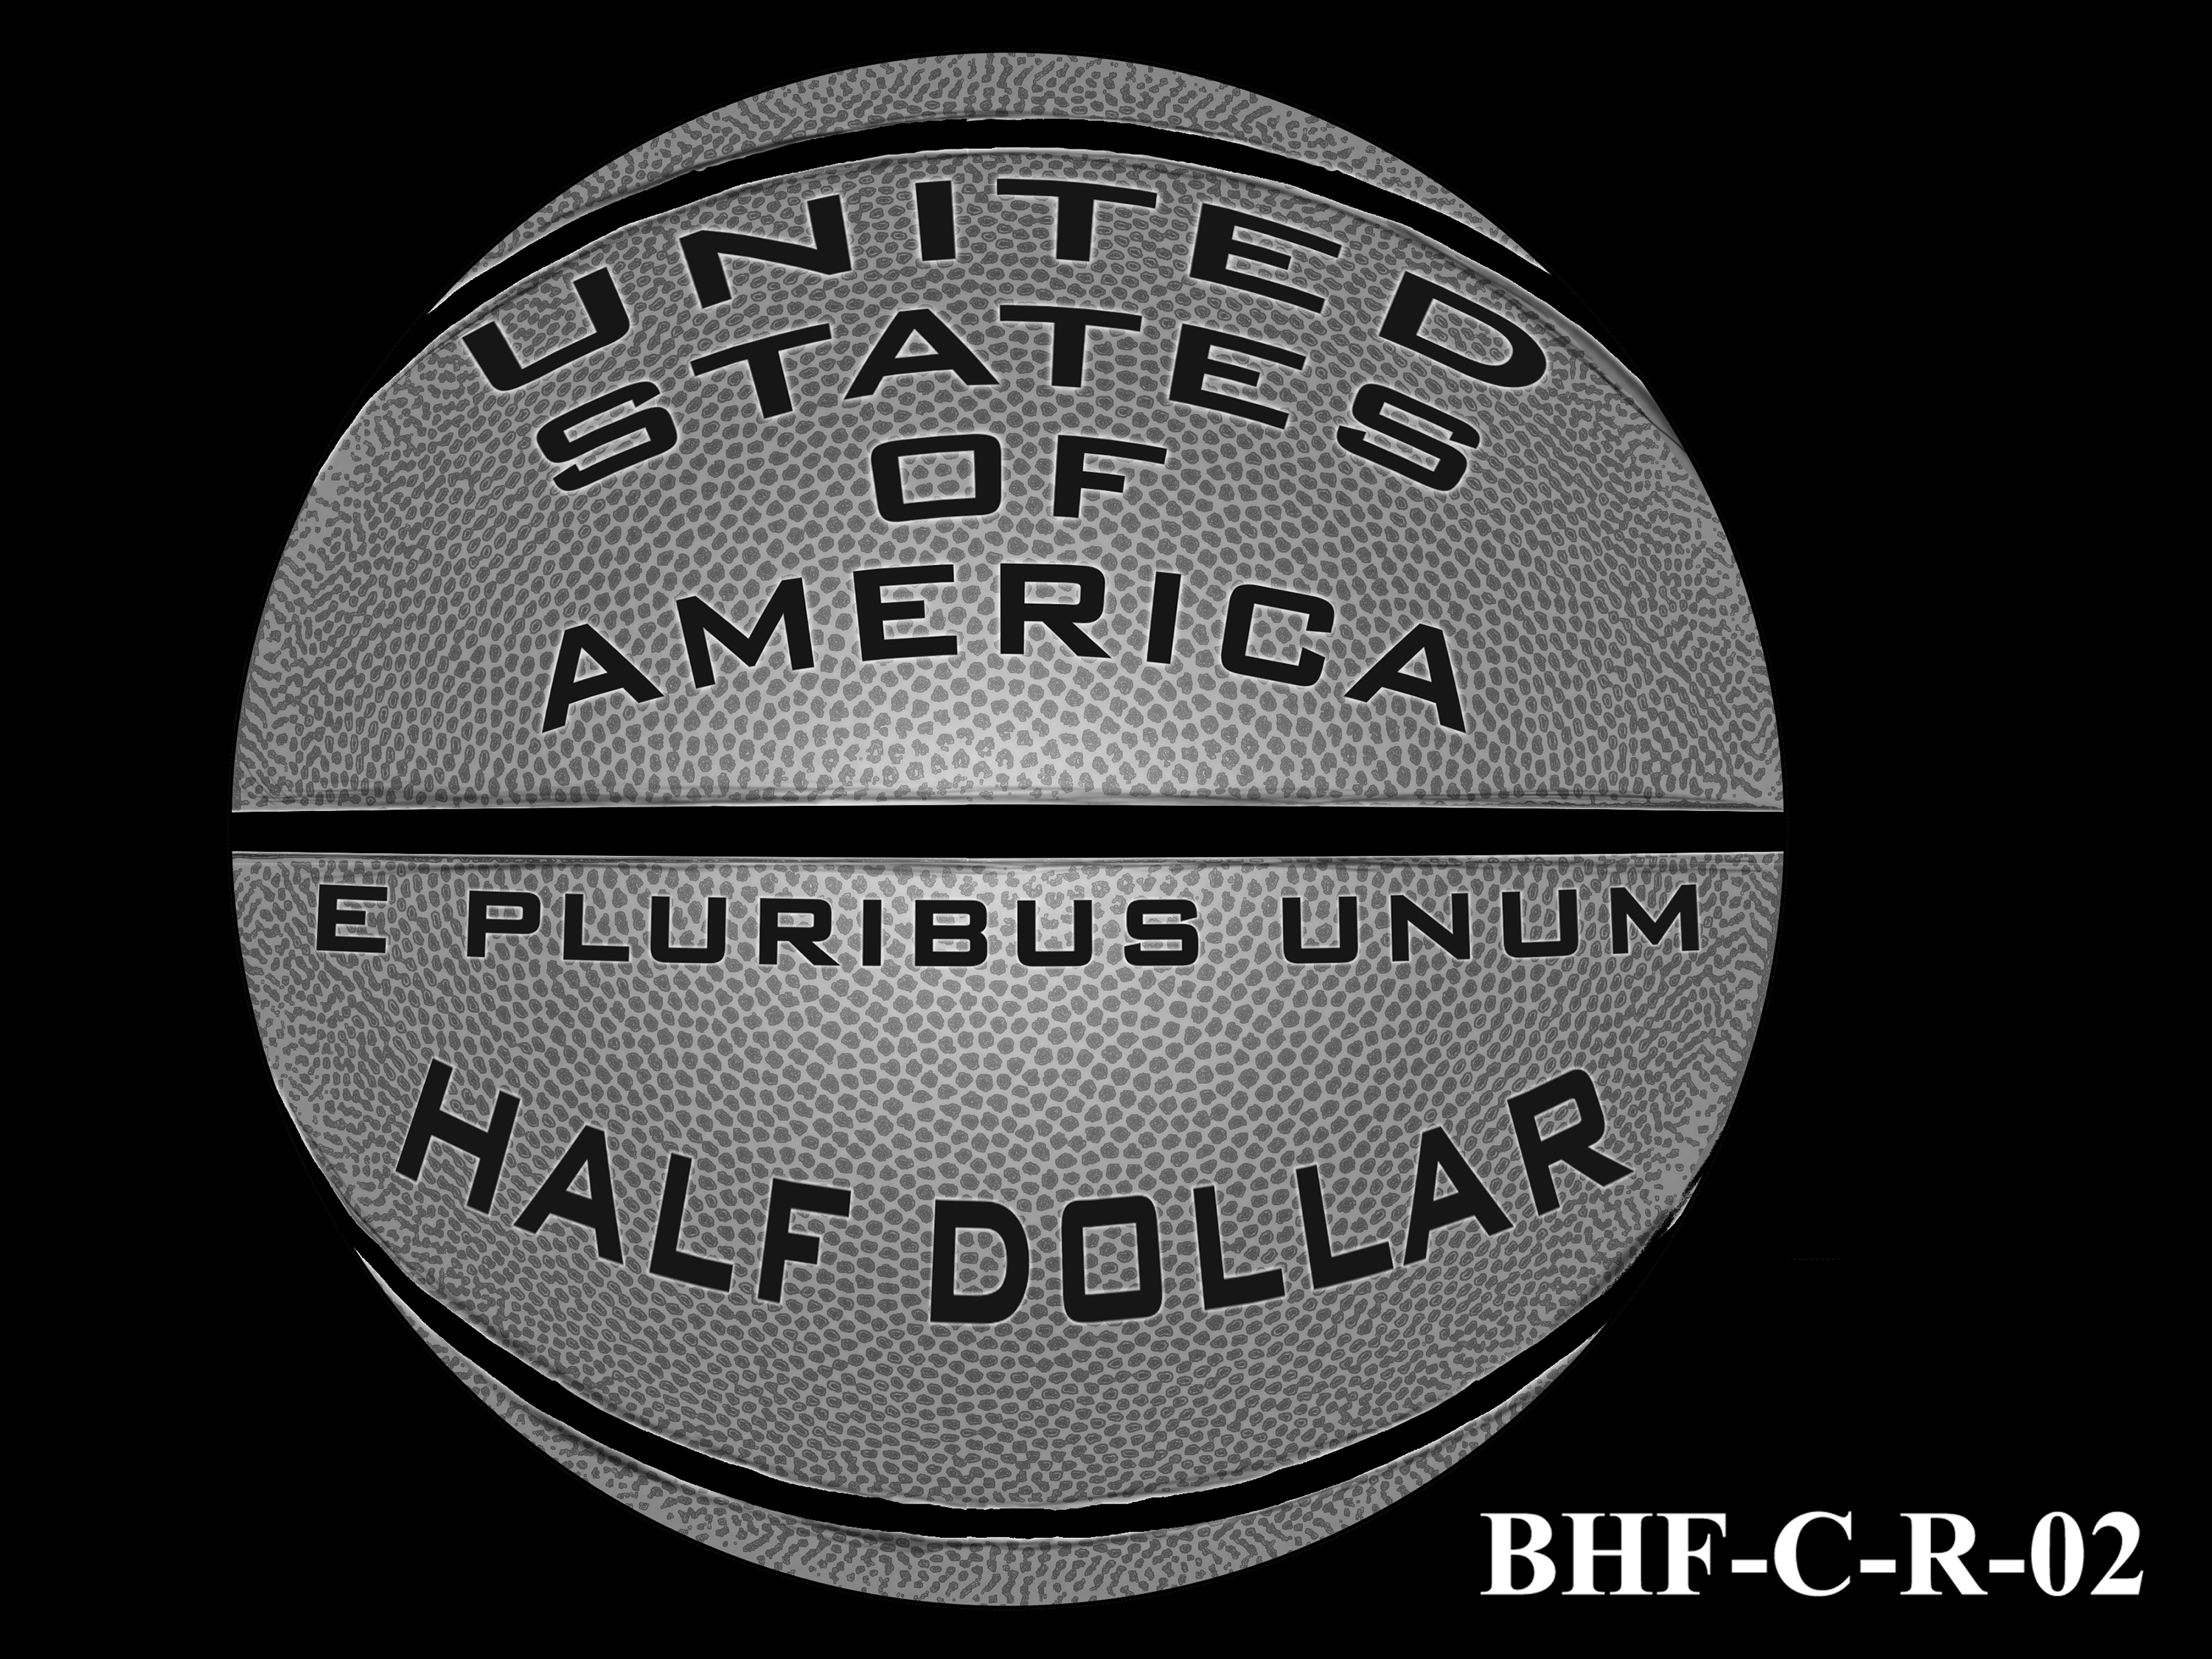 BHF-C-R-02 -- 2020 Basketball Hall of Fame Commemorative Coin Program - Clad Reverse